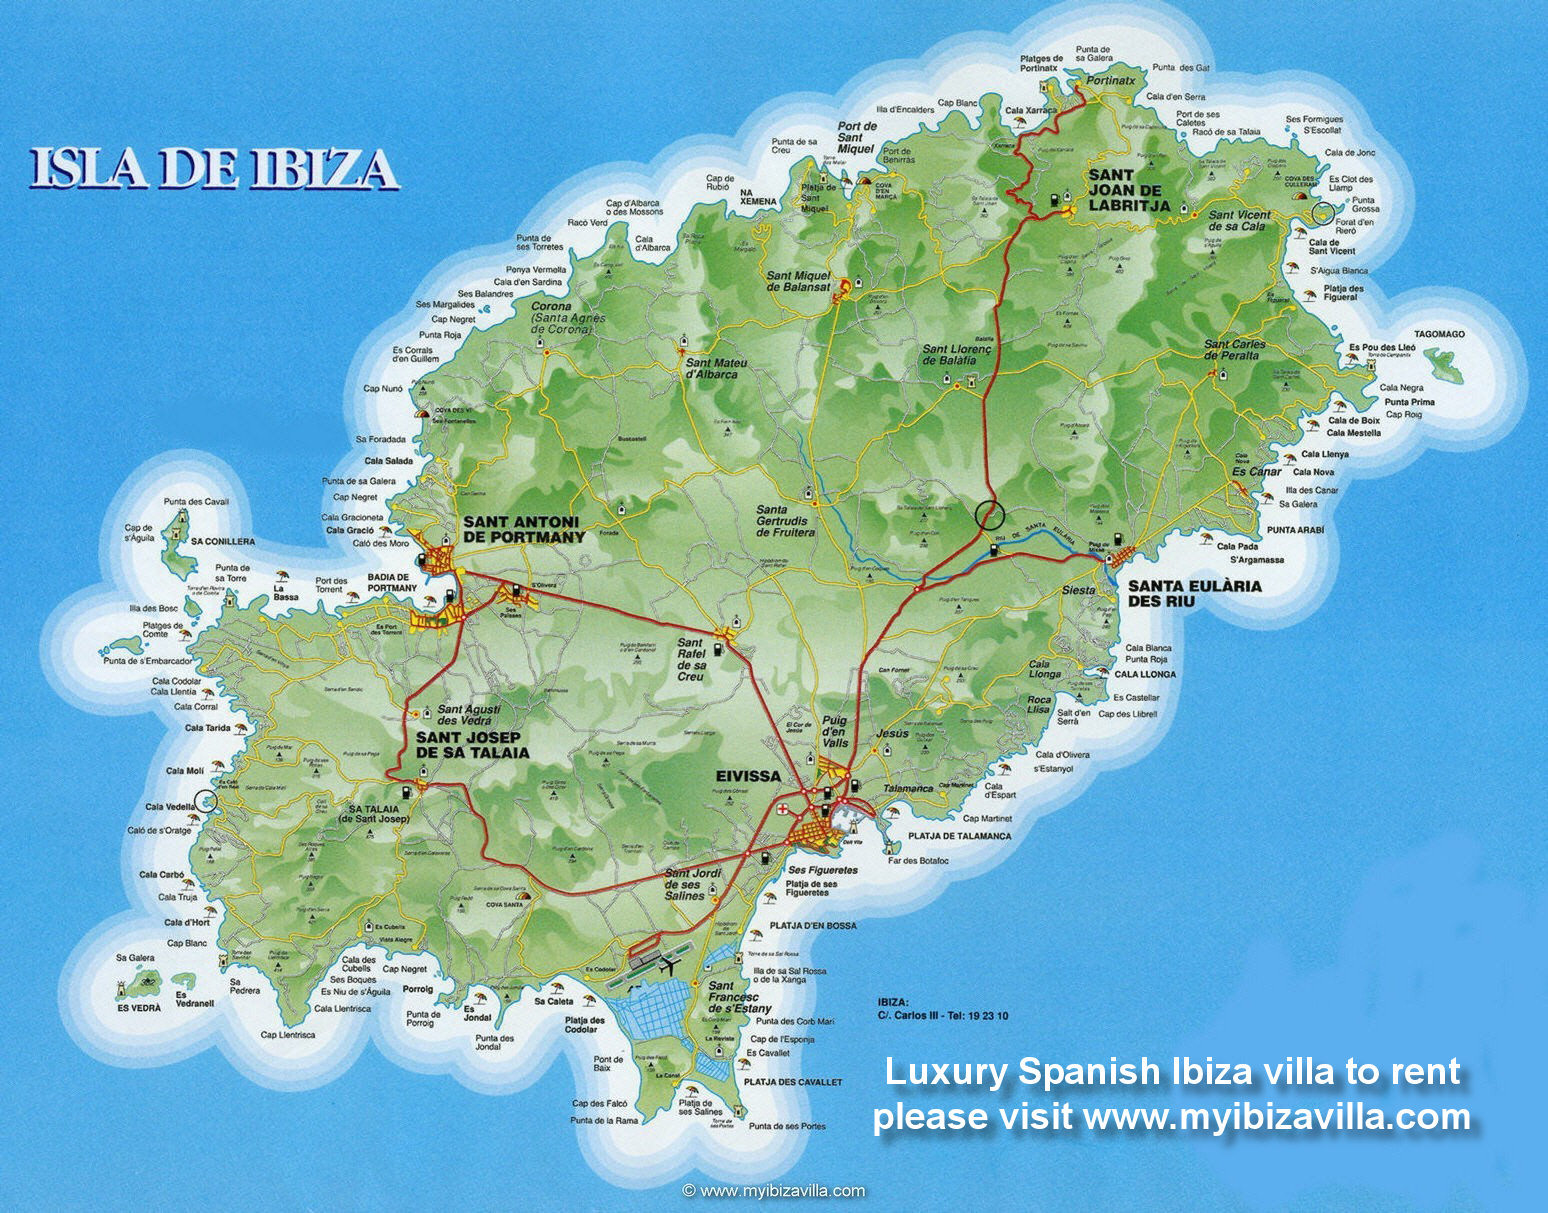 Your Holiday Villa for rent in Ibiza is at the circle on top of the map